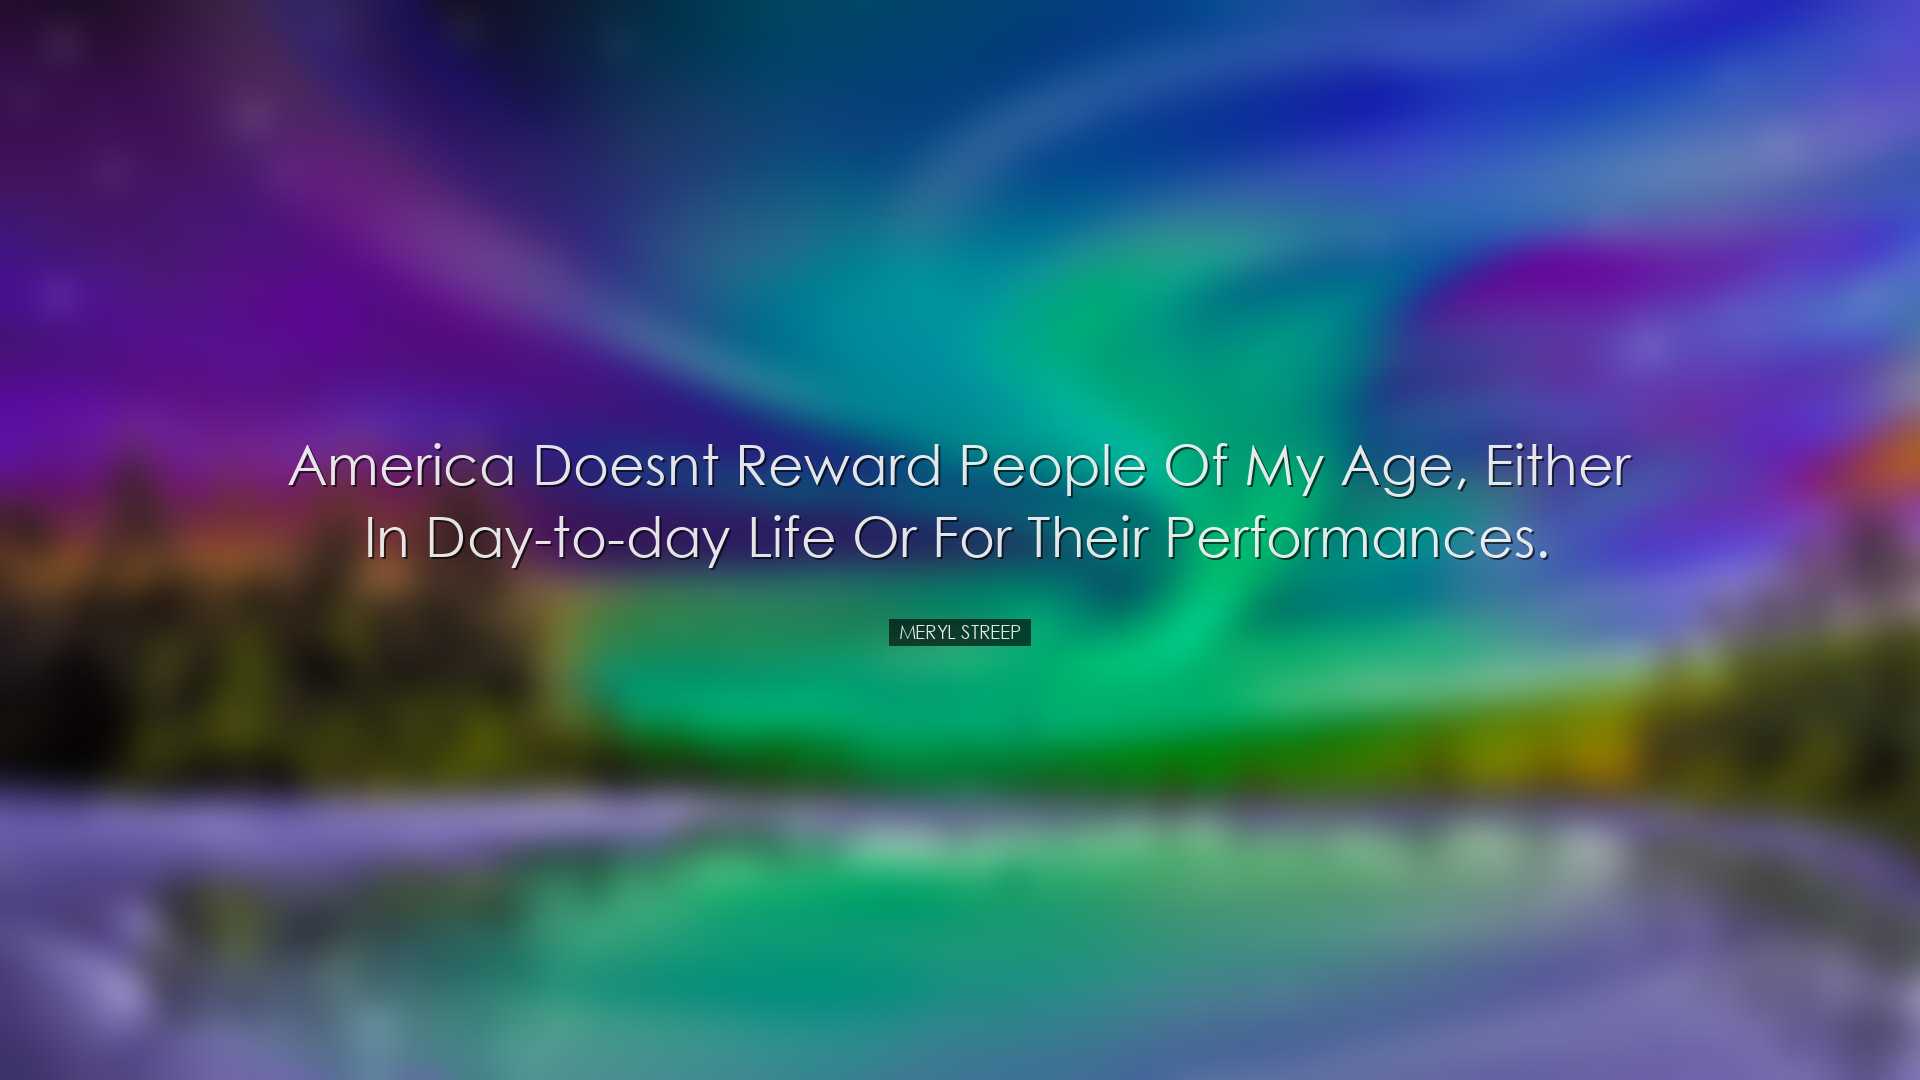 America doesnt reward people of my age, either in day-to-day life